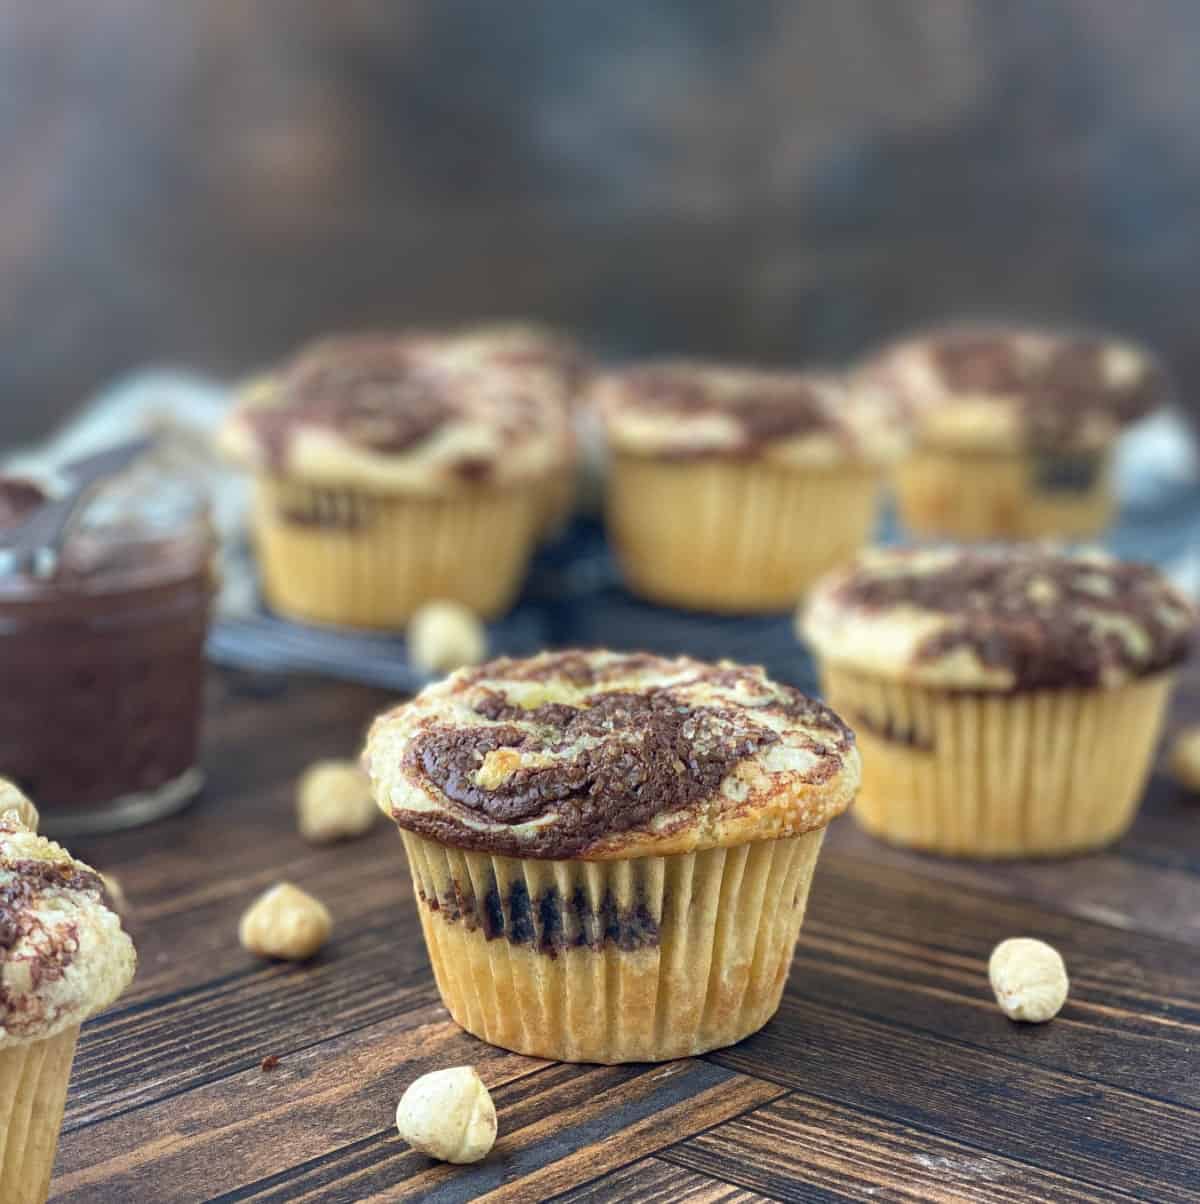 Nutella Muffins with hazelnuts scattered nearby on a wood table.